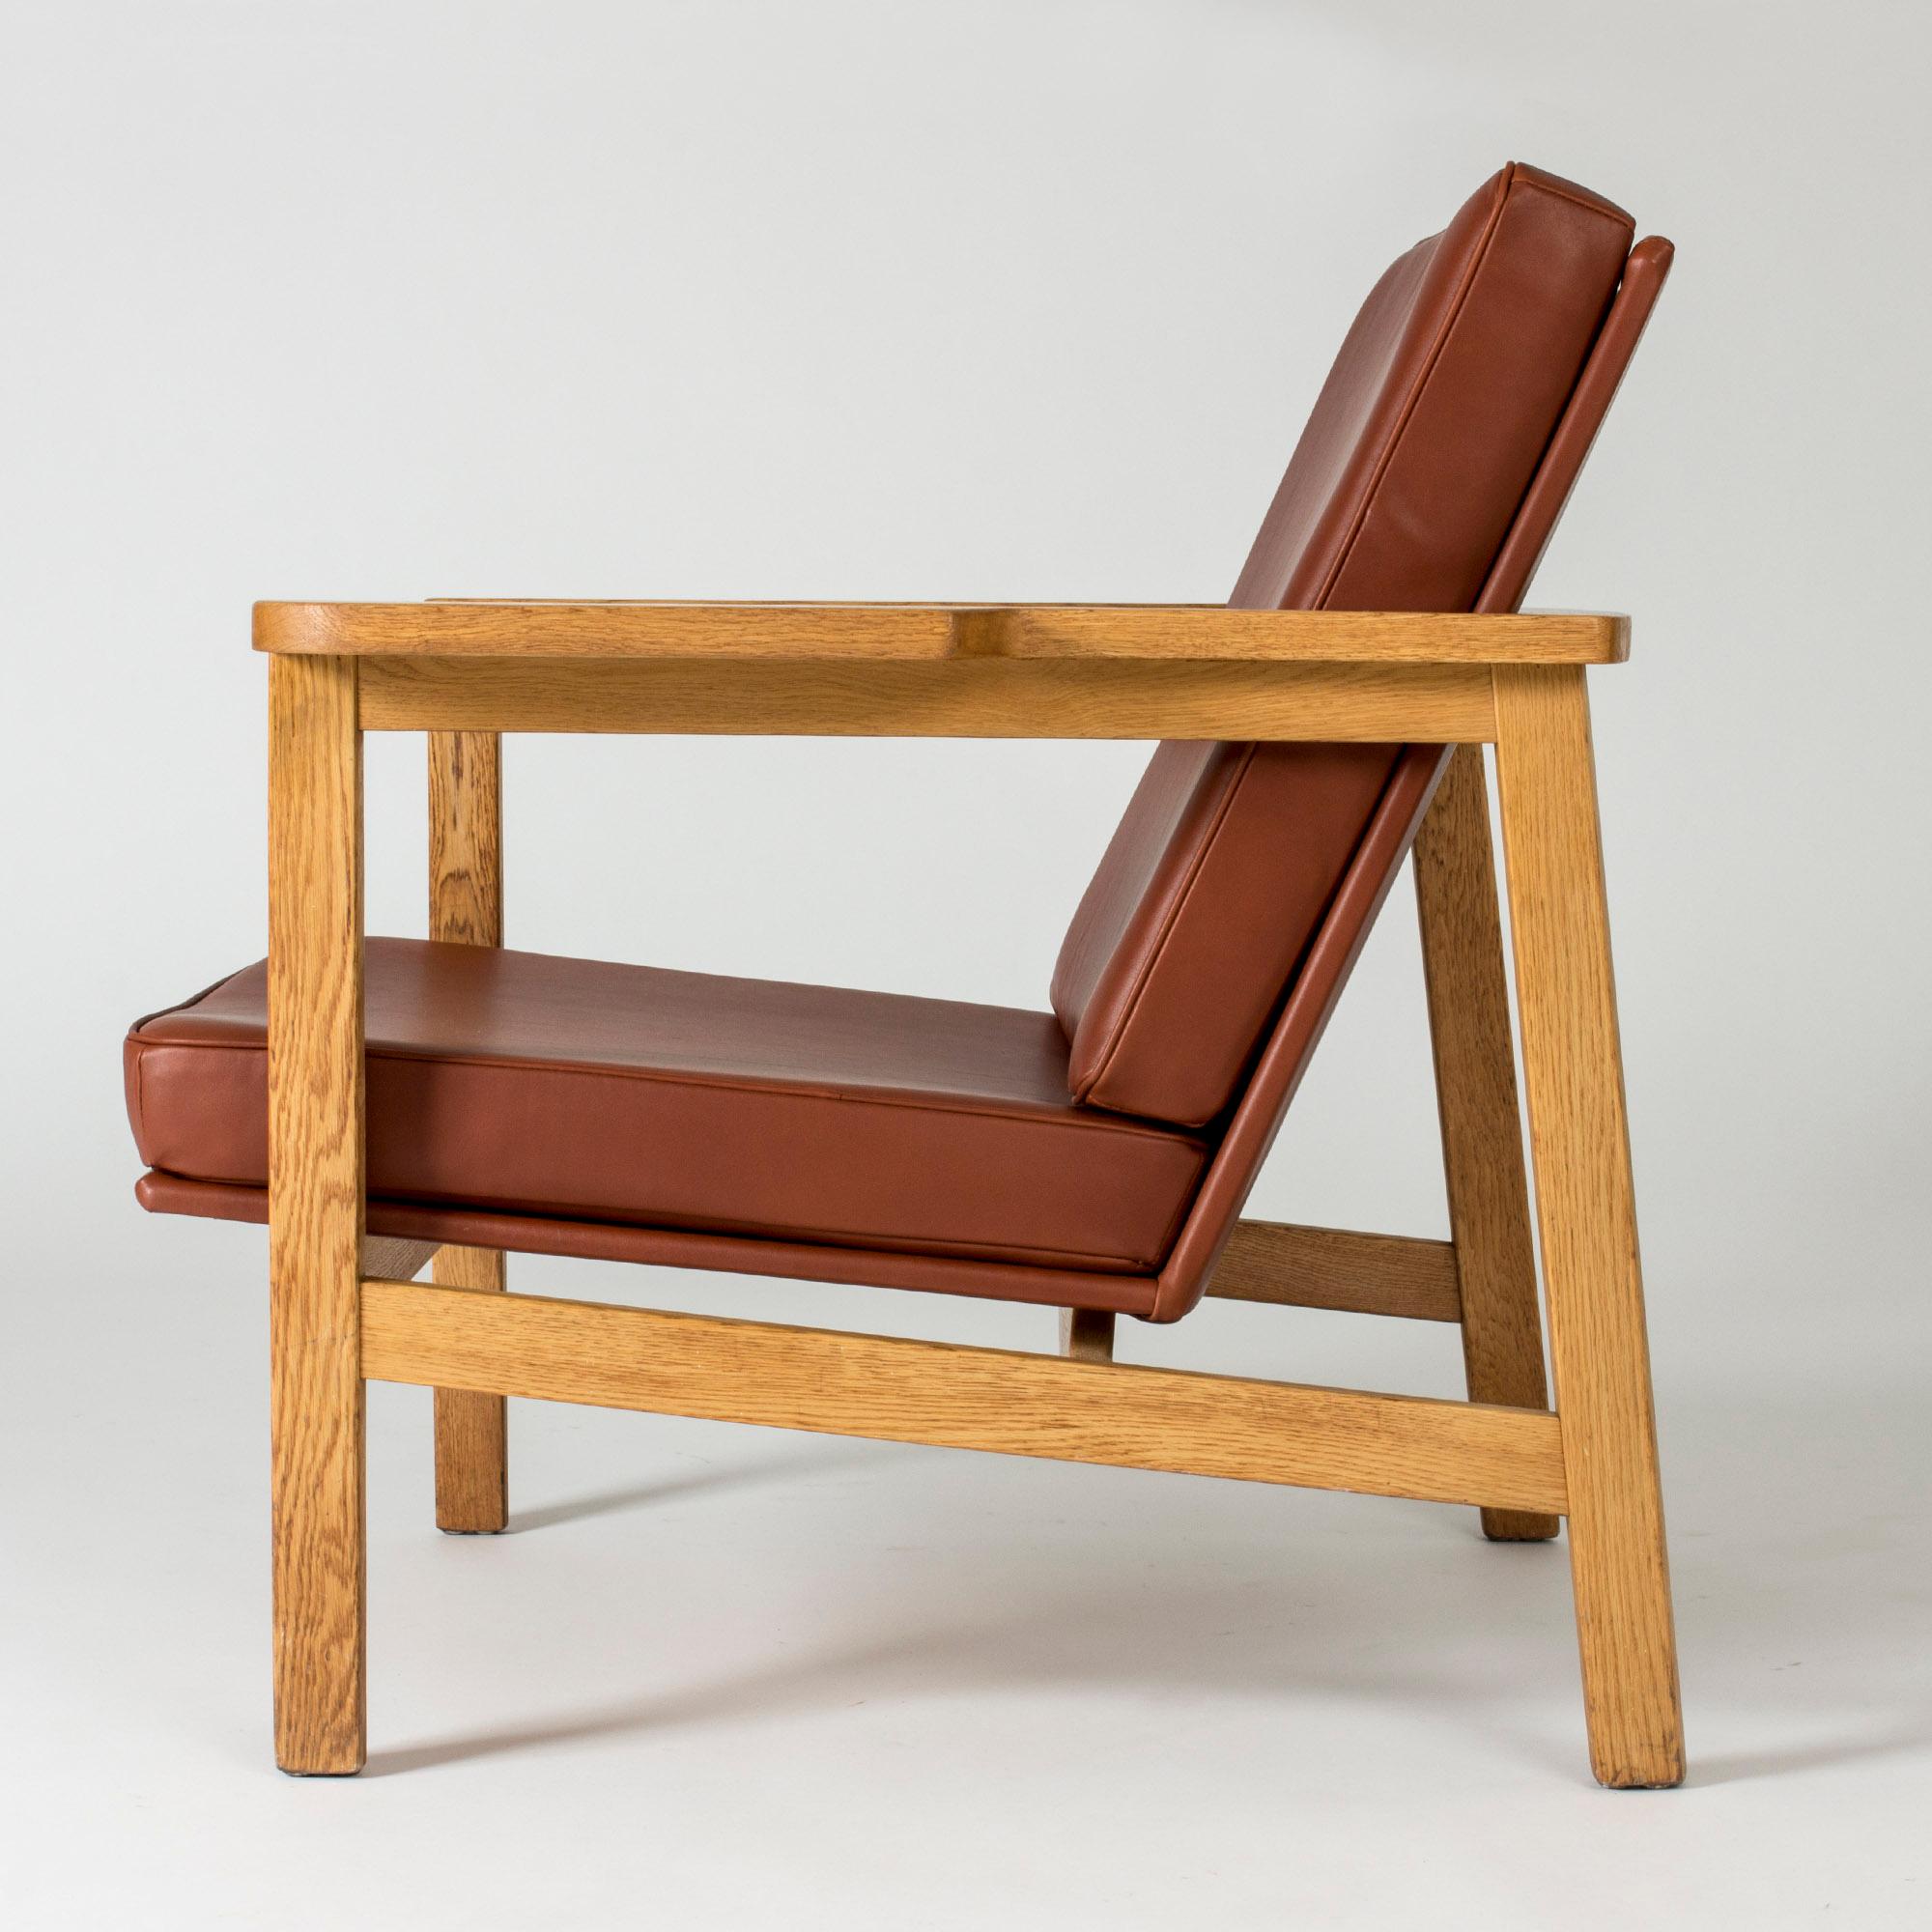 Leather Pair of Lounge Chairs by Carl-Axel Acking for Nordiska Kompaniet, Sweden, 1950s For Sale